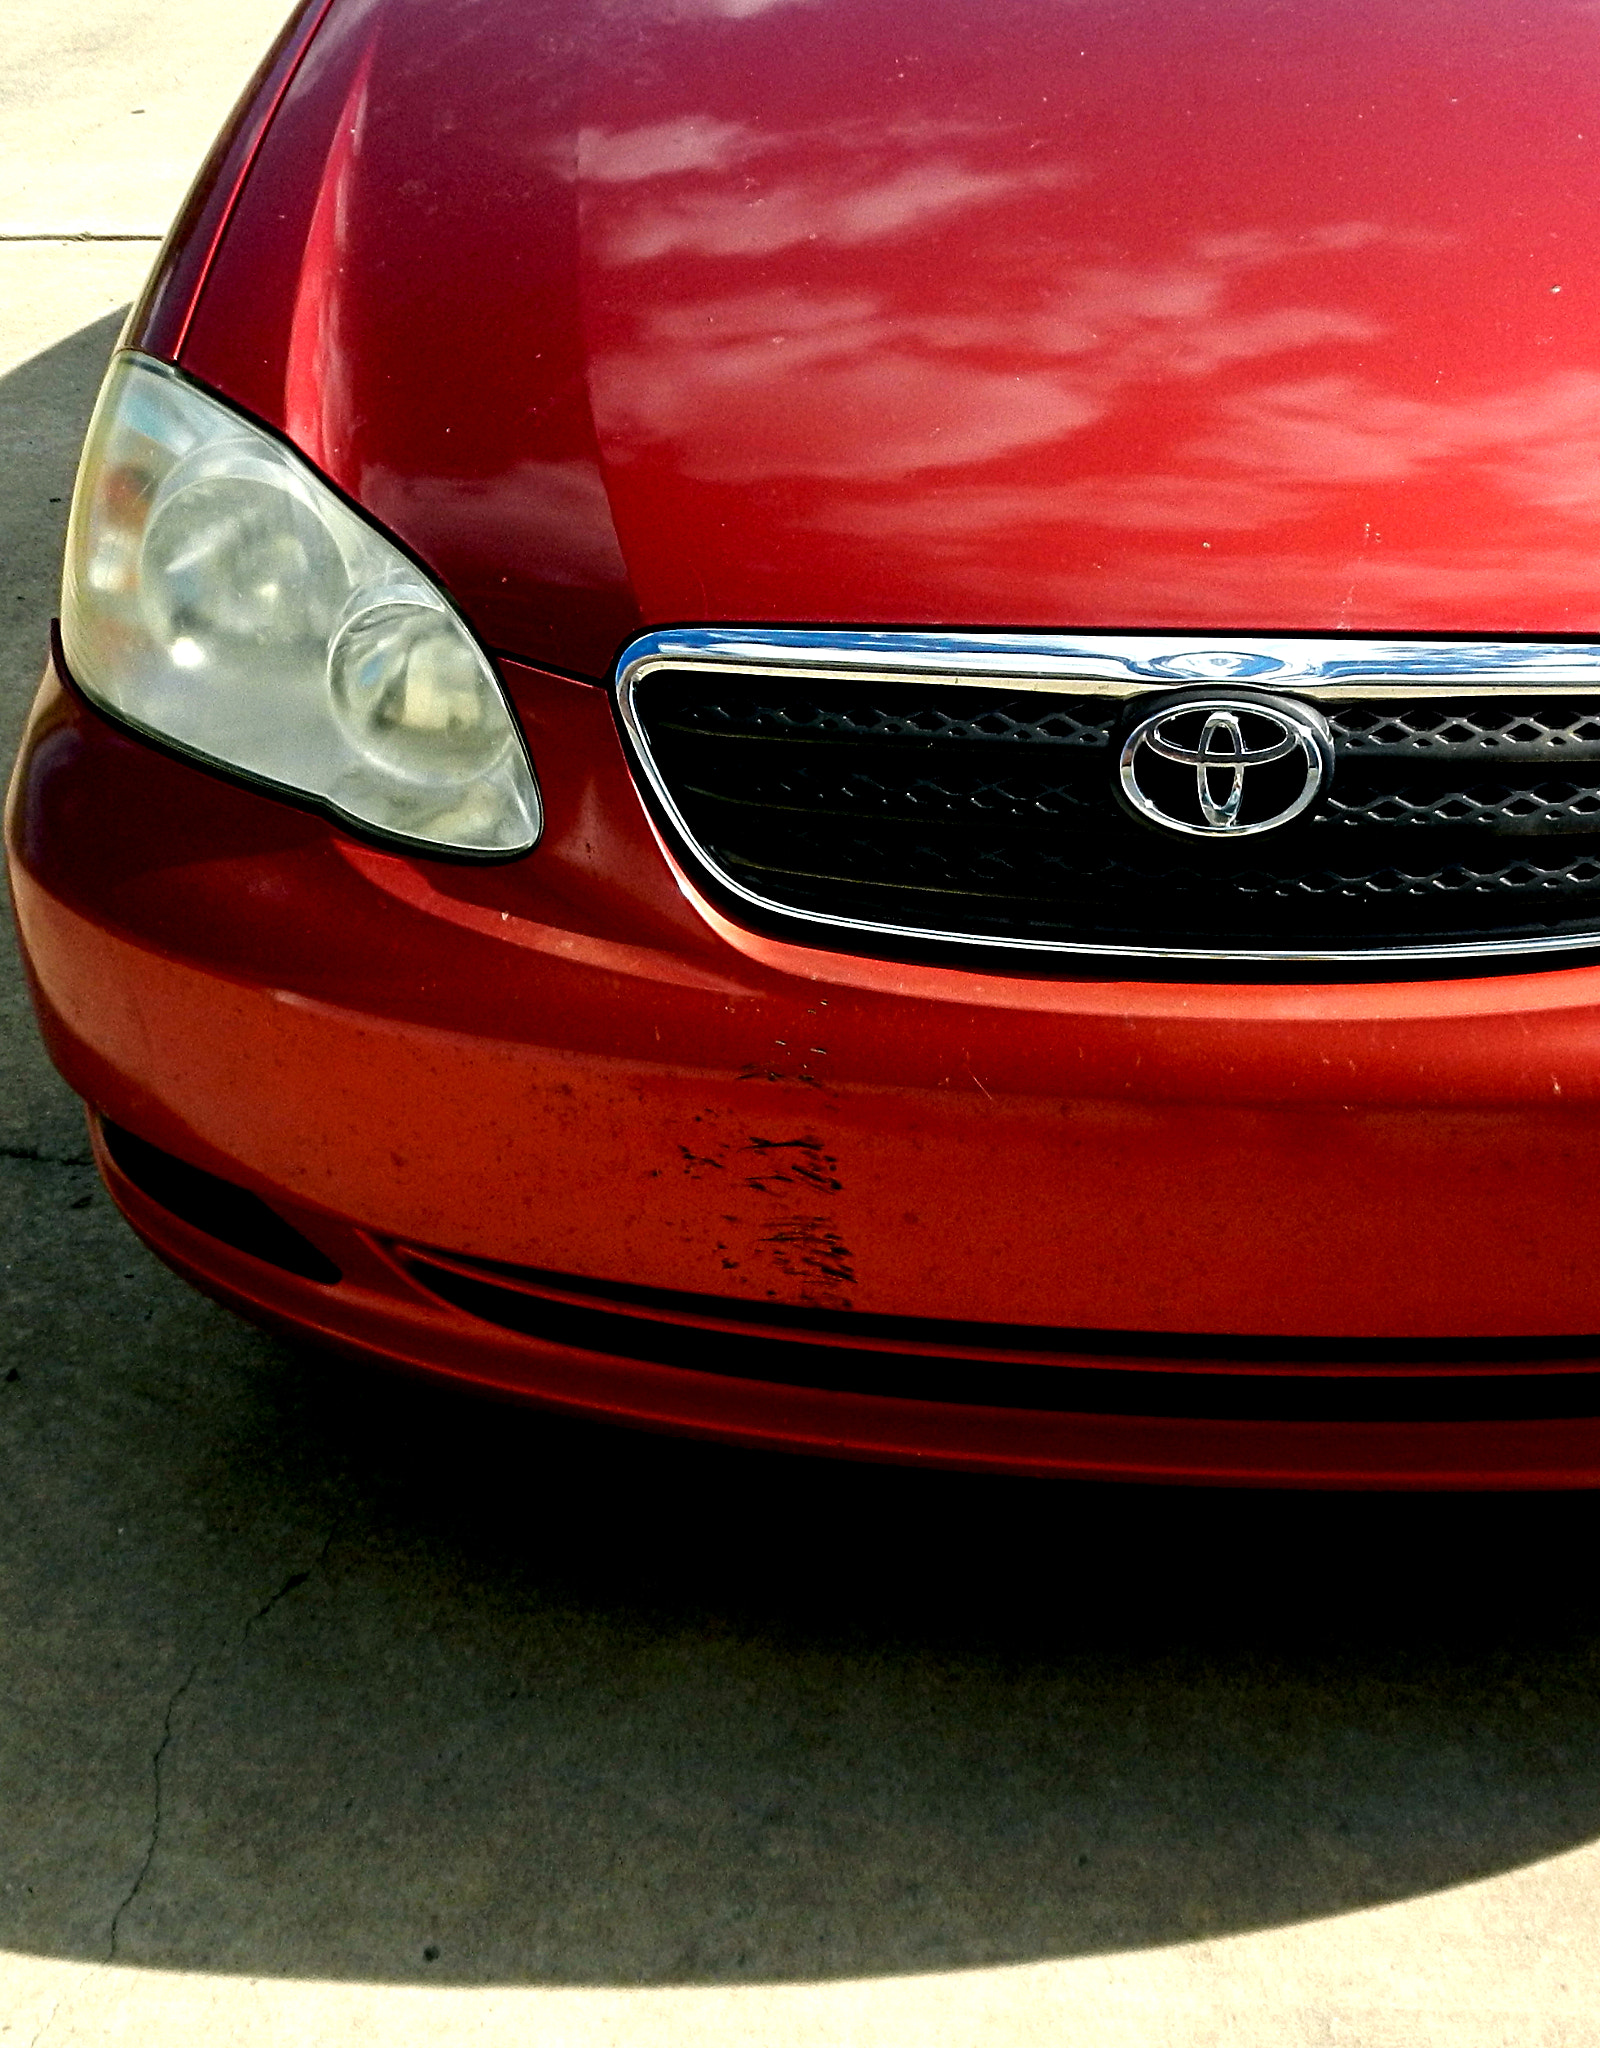 Nikon Coolpix S800c sample photo. Front of a red car photography